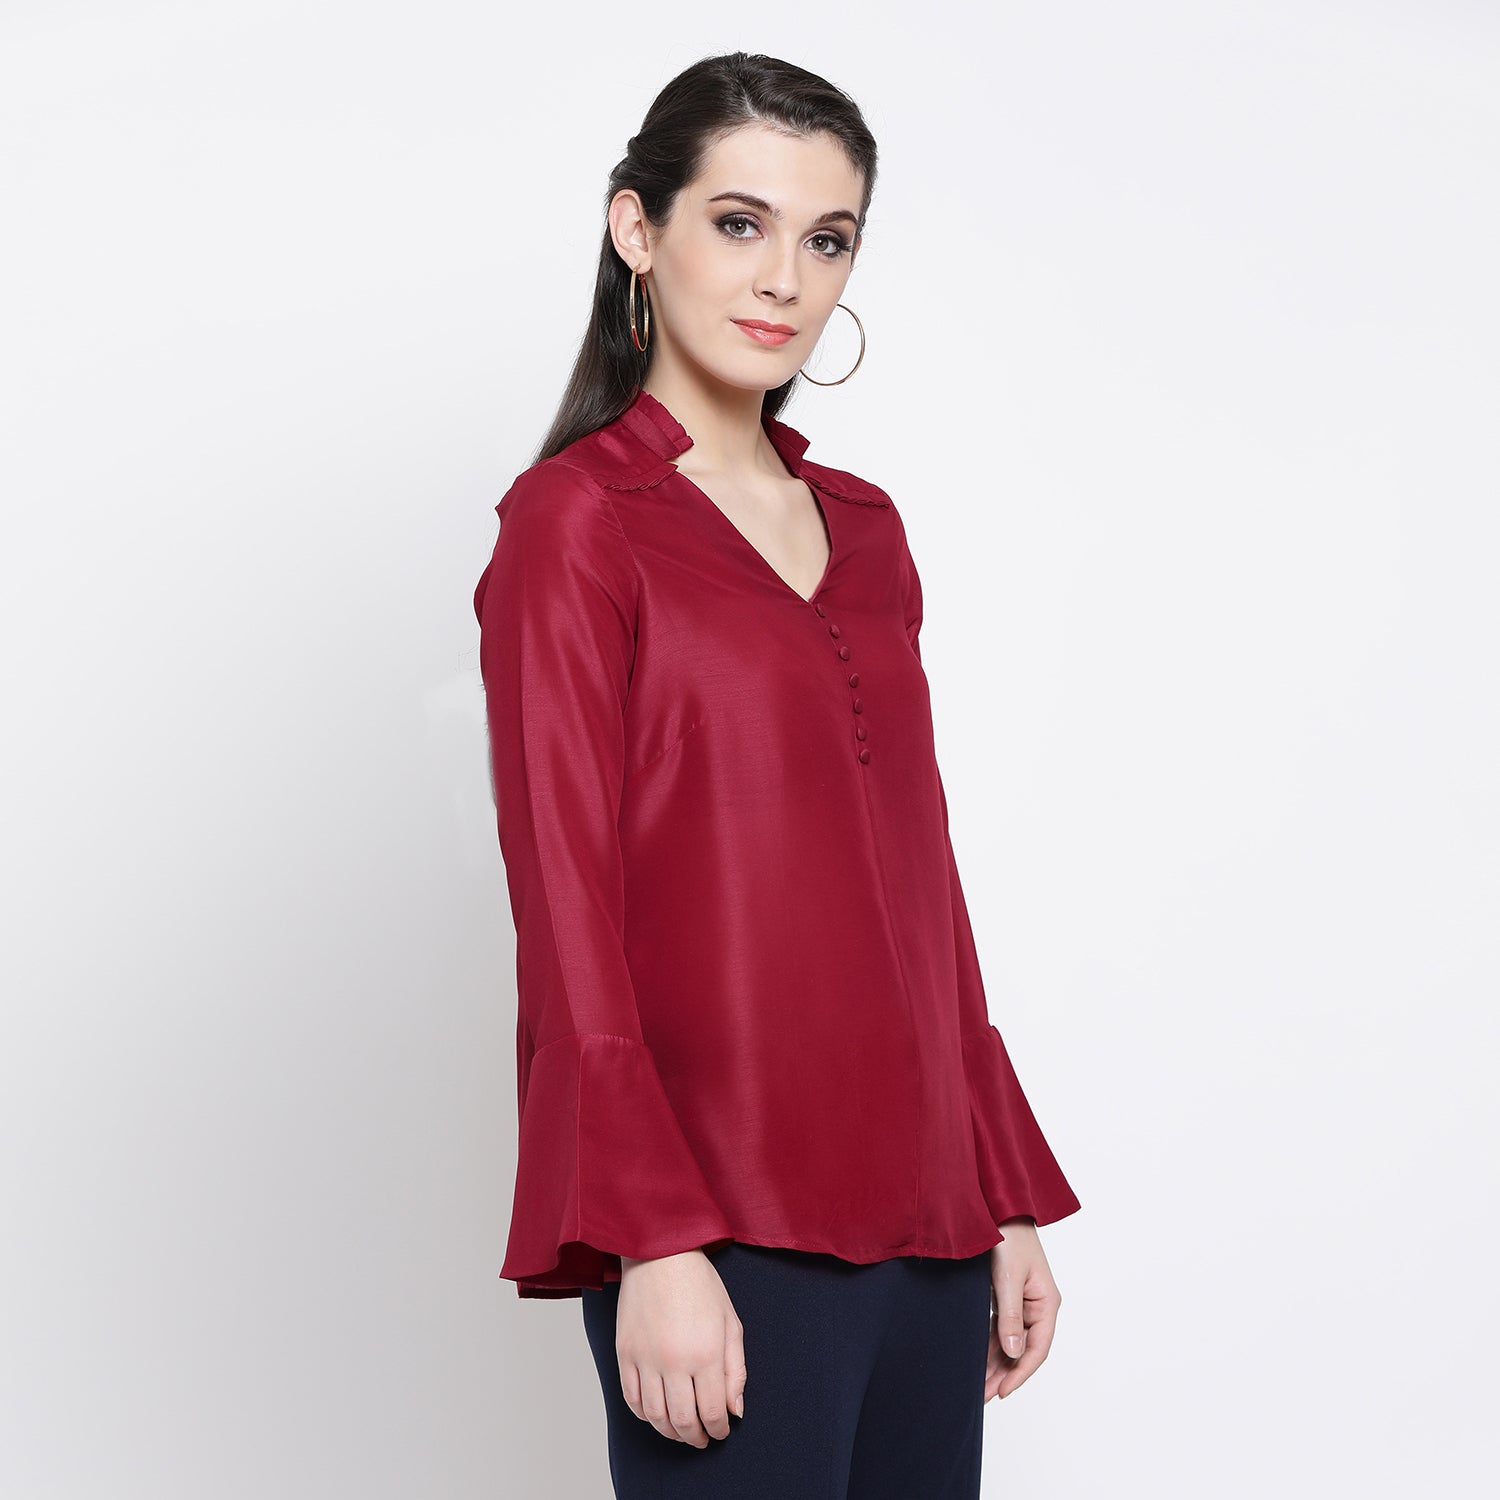 Maroon Top With Frill Collar And Button